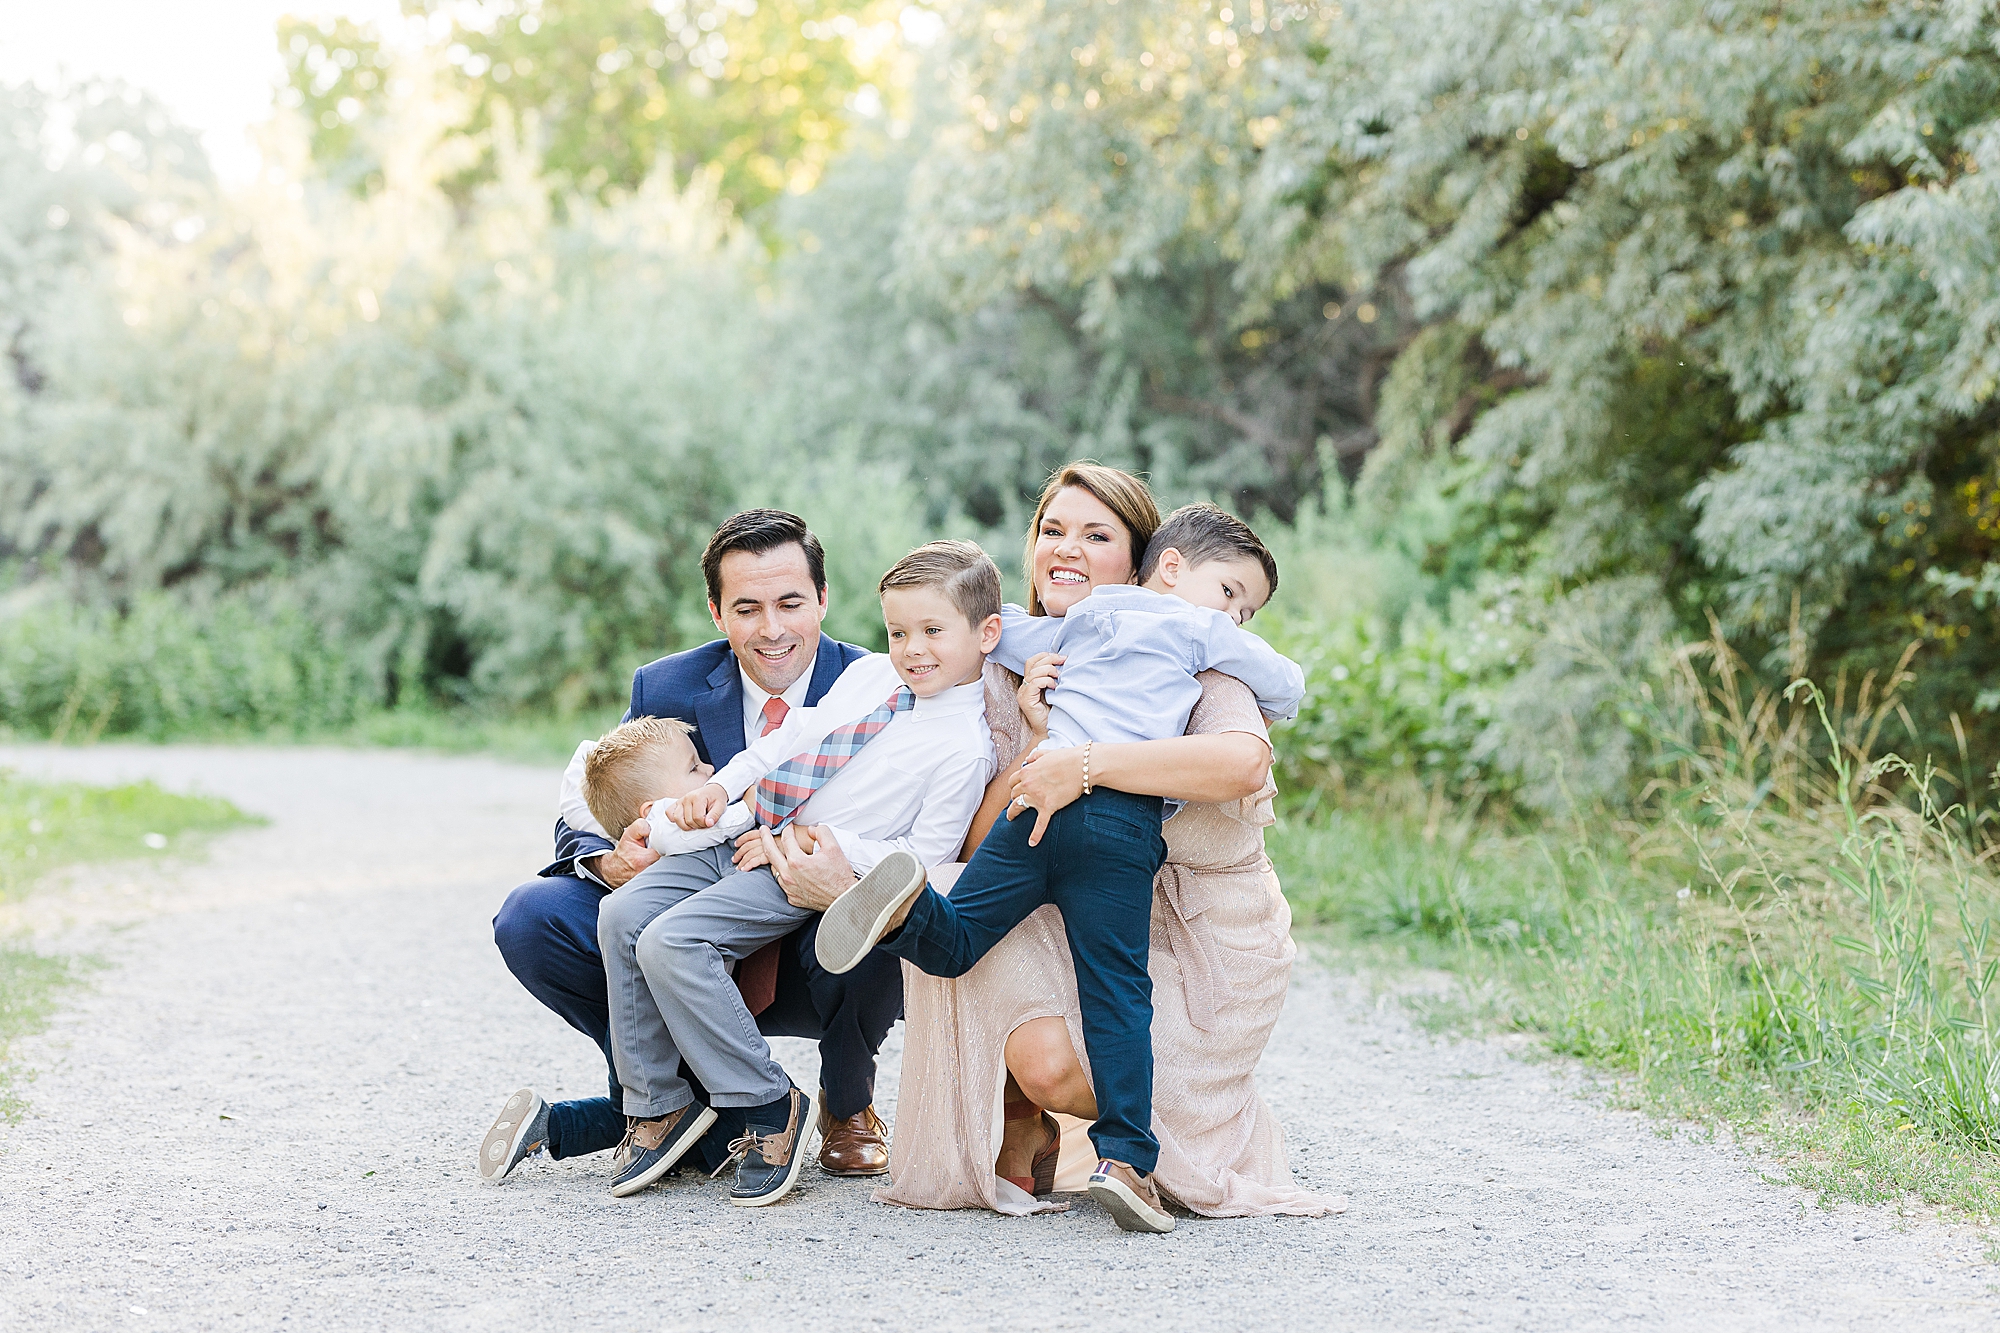 How to style the boys for summer family photos